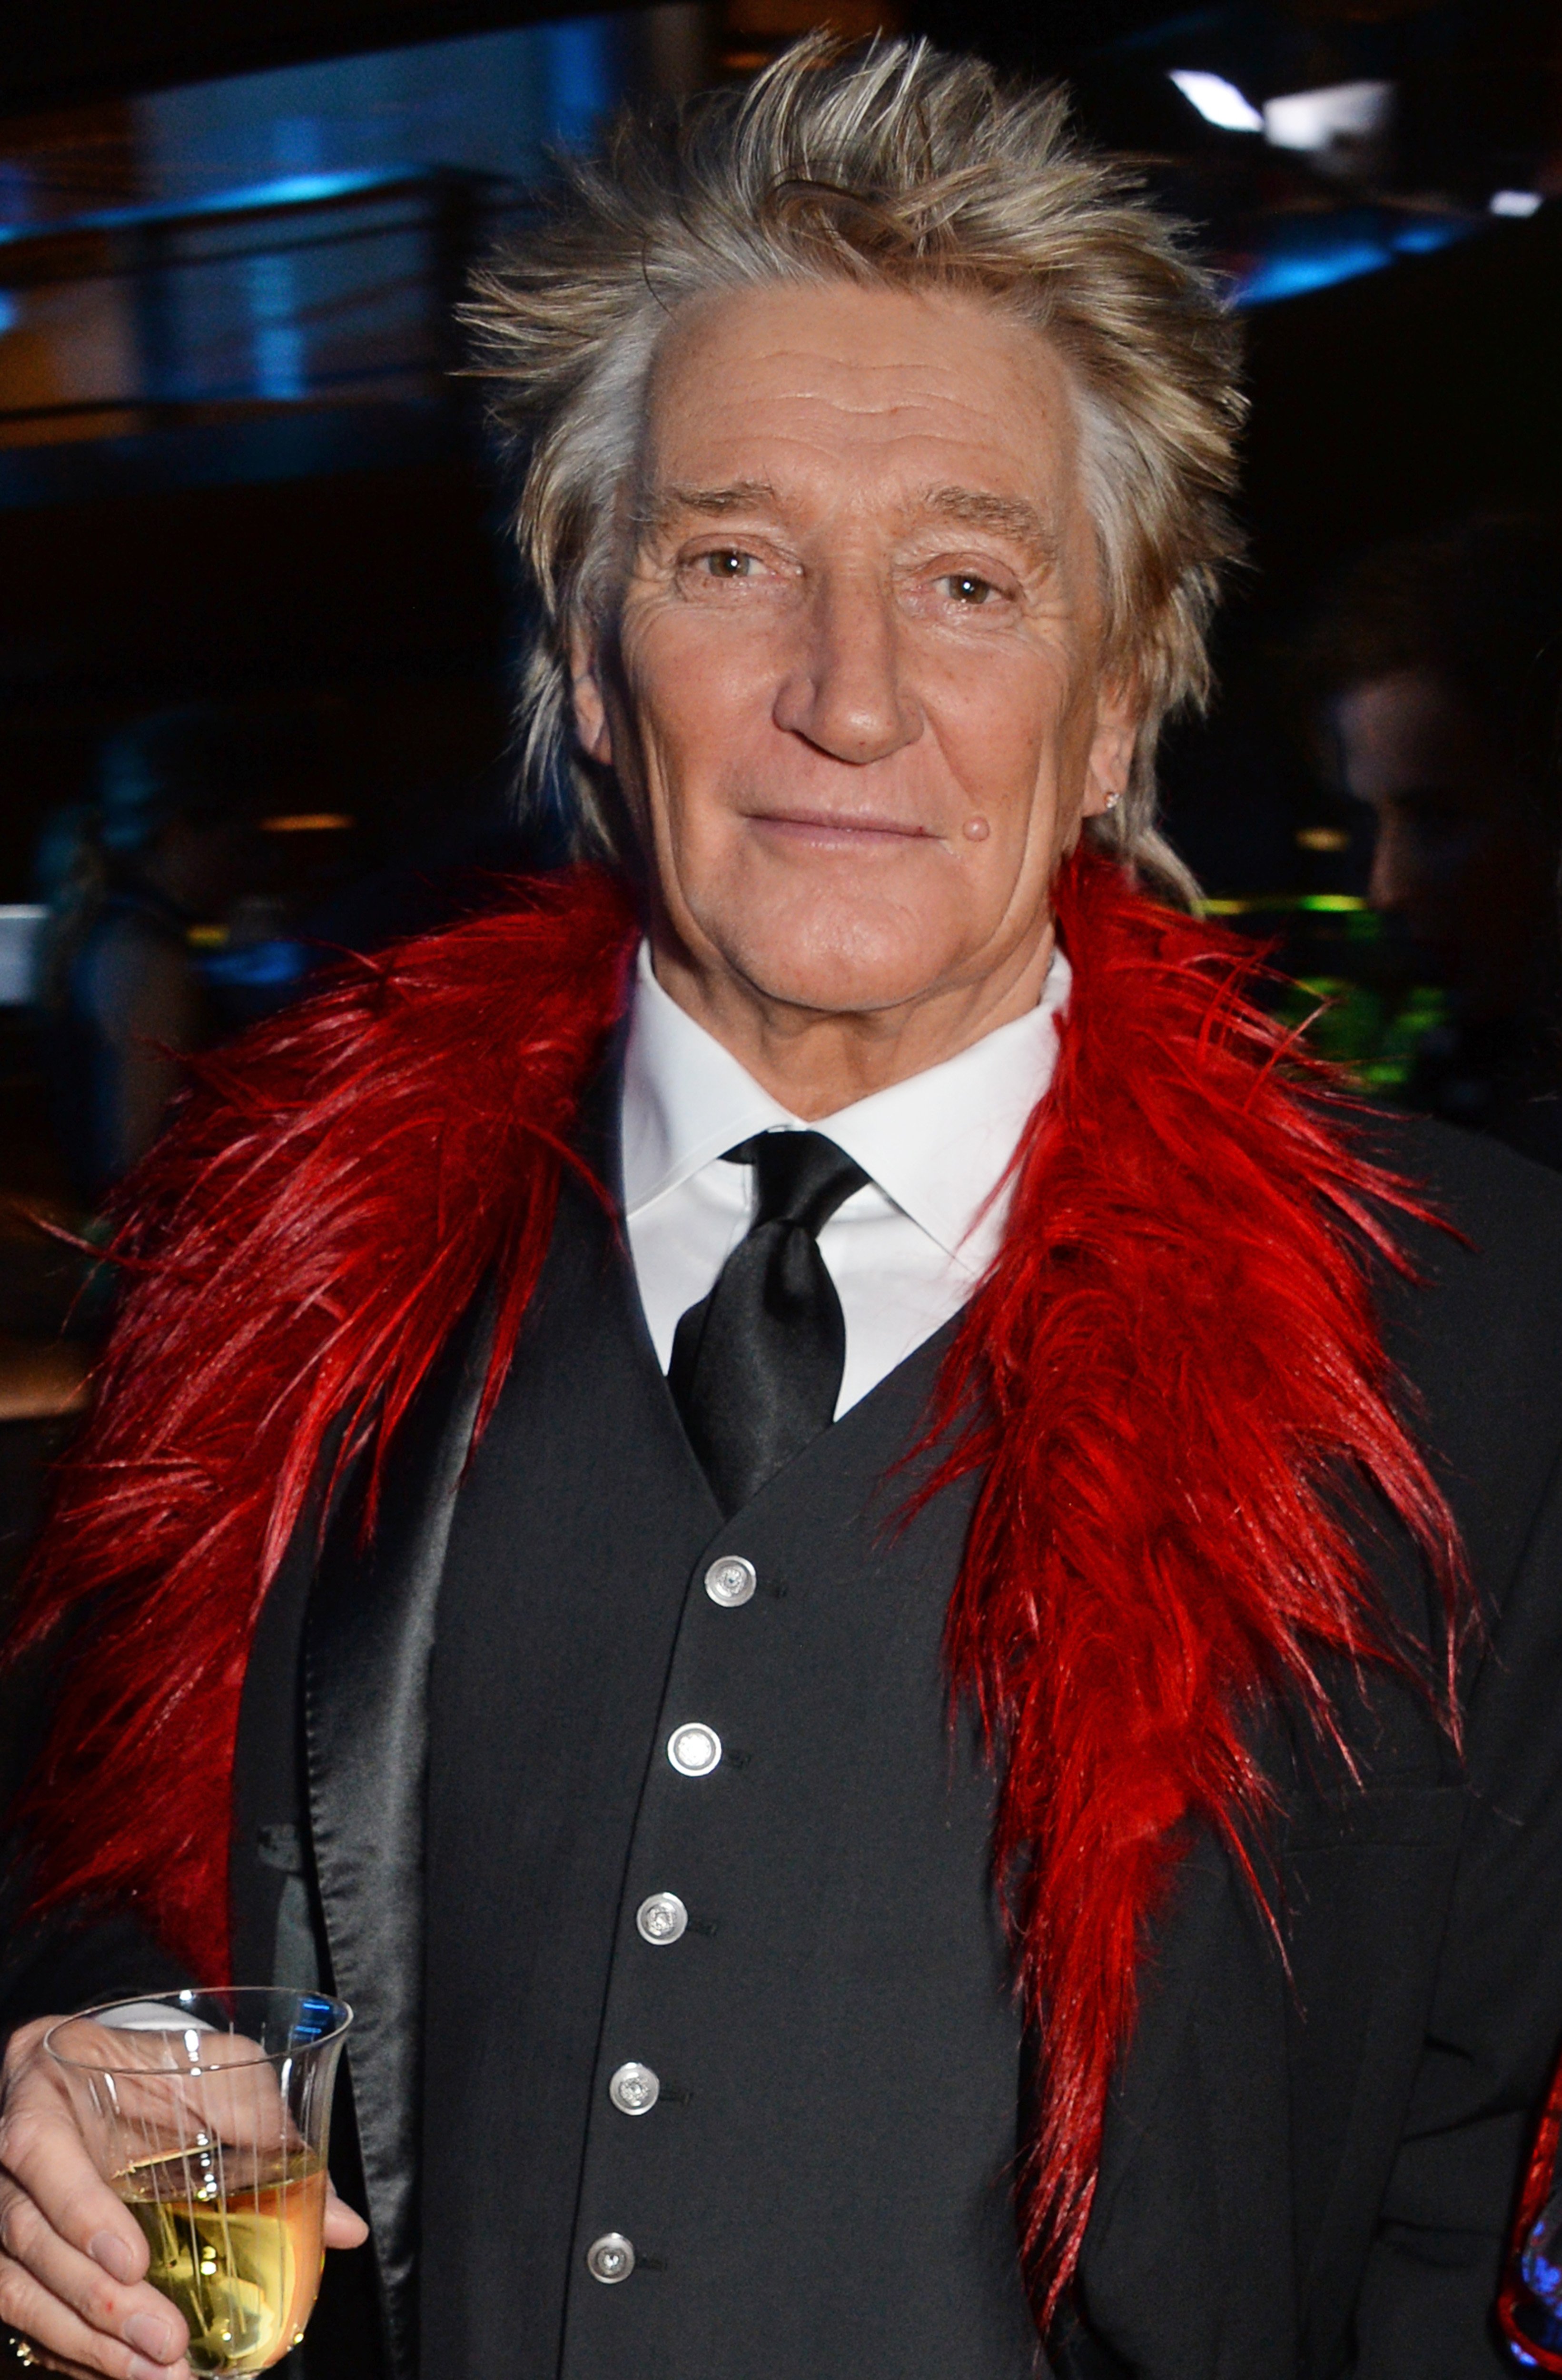 Sir Rod Stewart attends the Bloomberg x Vanity Fair Climate Exchange gala dinner 2018 at Bloomberg London on December 11, 2018 | Photo: Getty Images